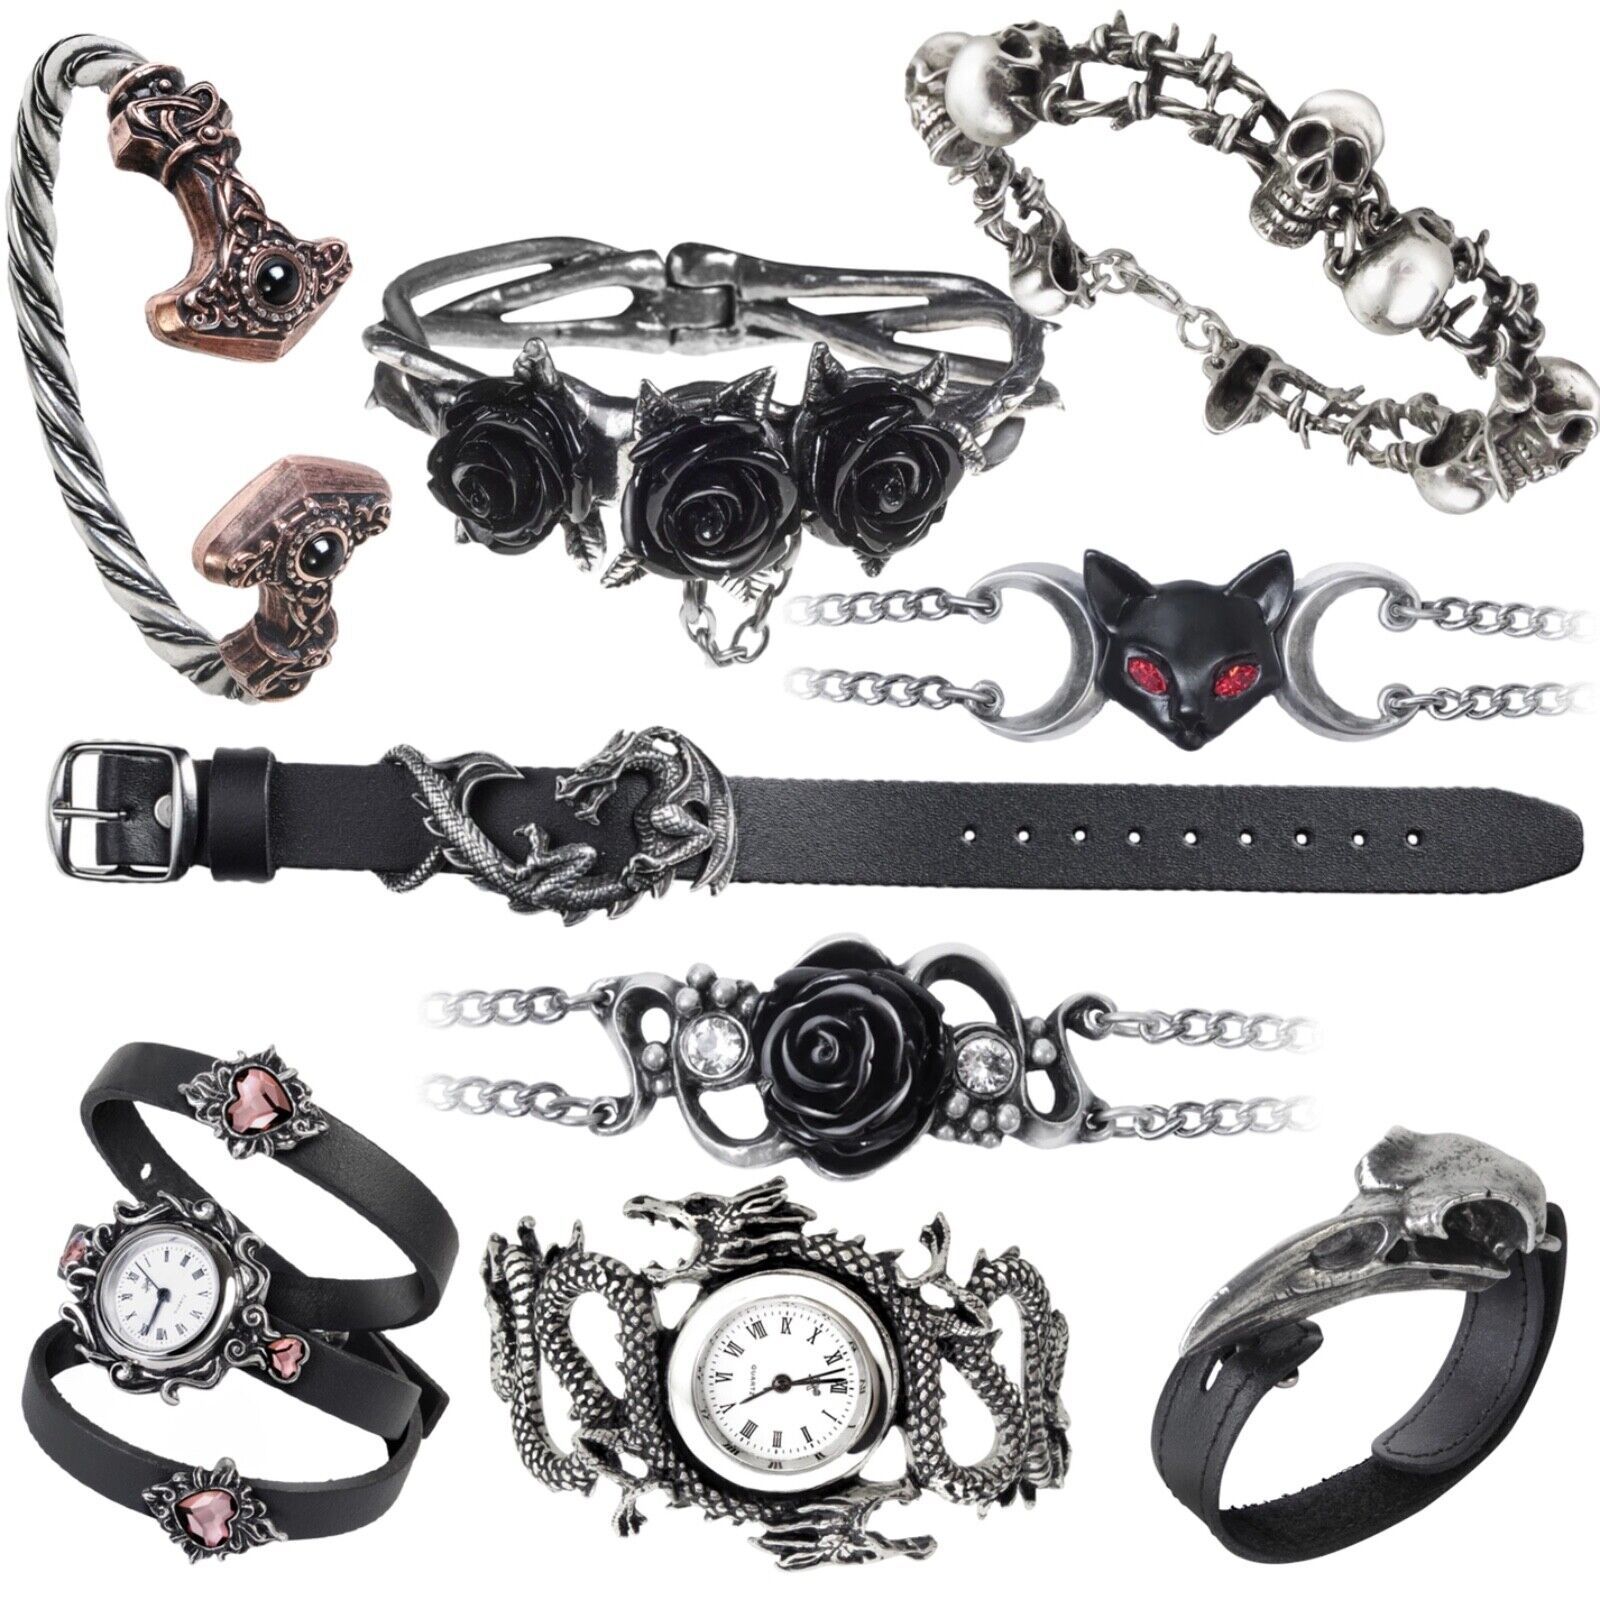 Alchemy Gothic Braclets Wriststraps Watches Bangles Jewerly YOU CHOOSE - $30.00 - $70.00